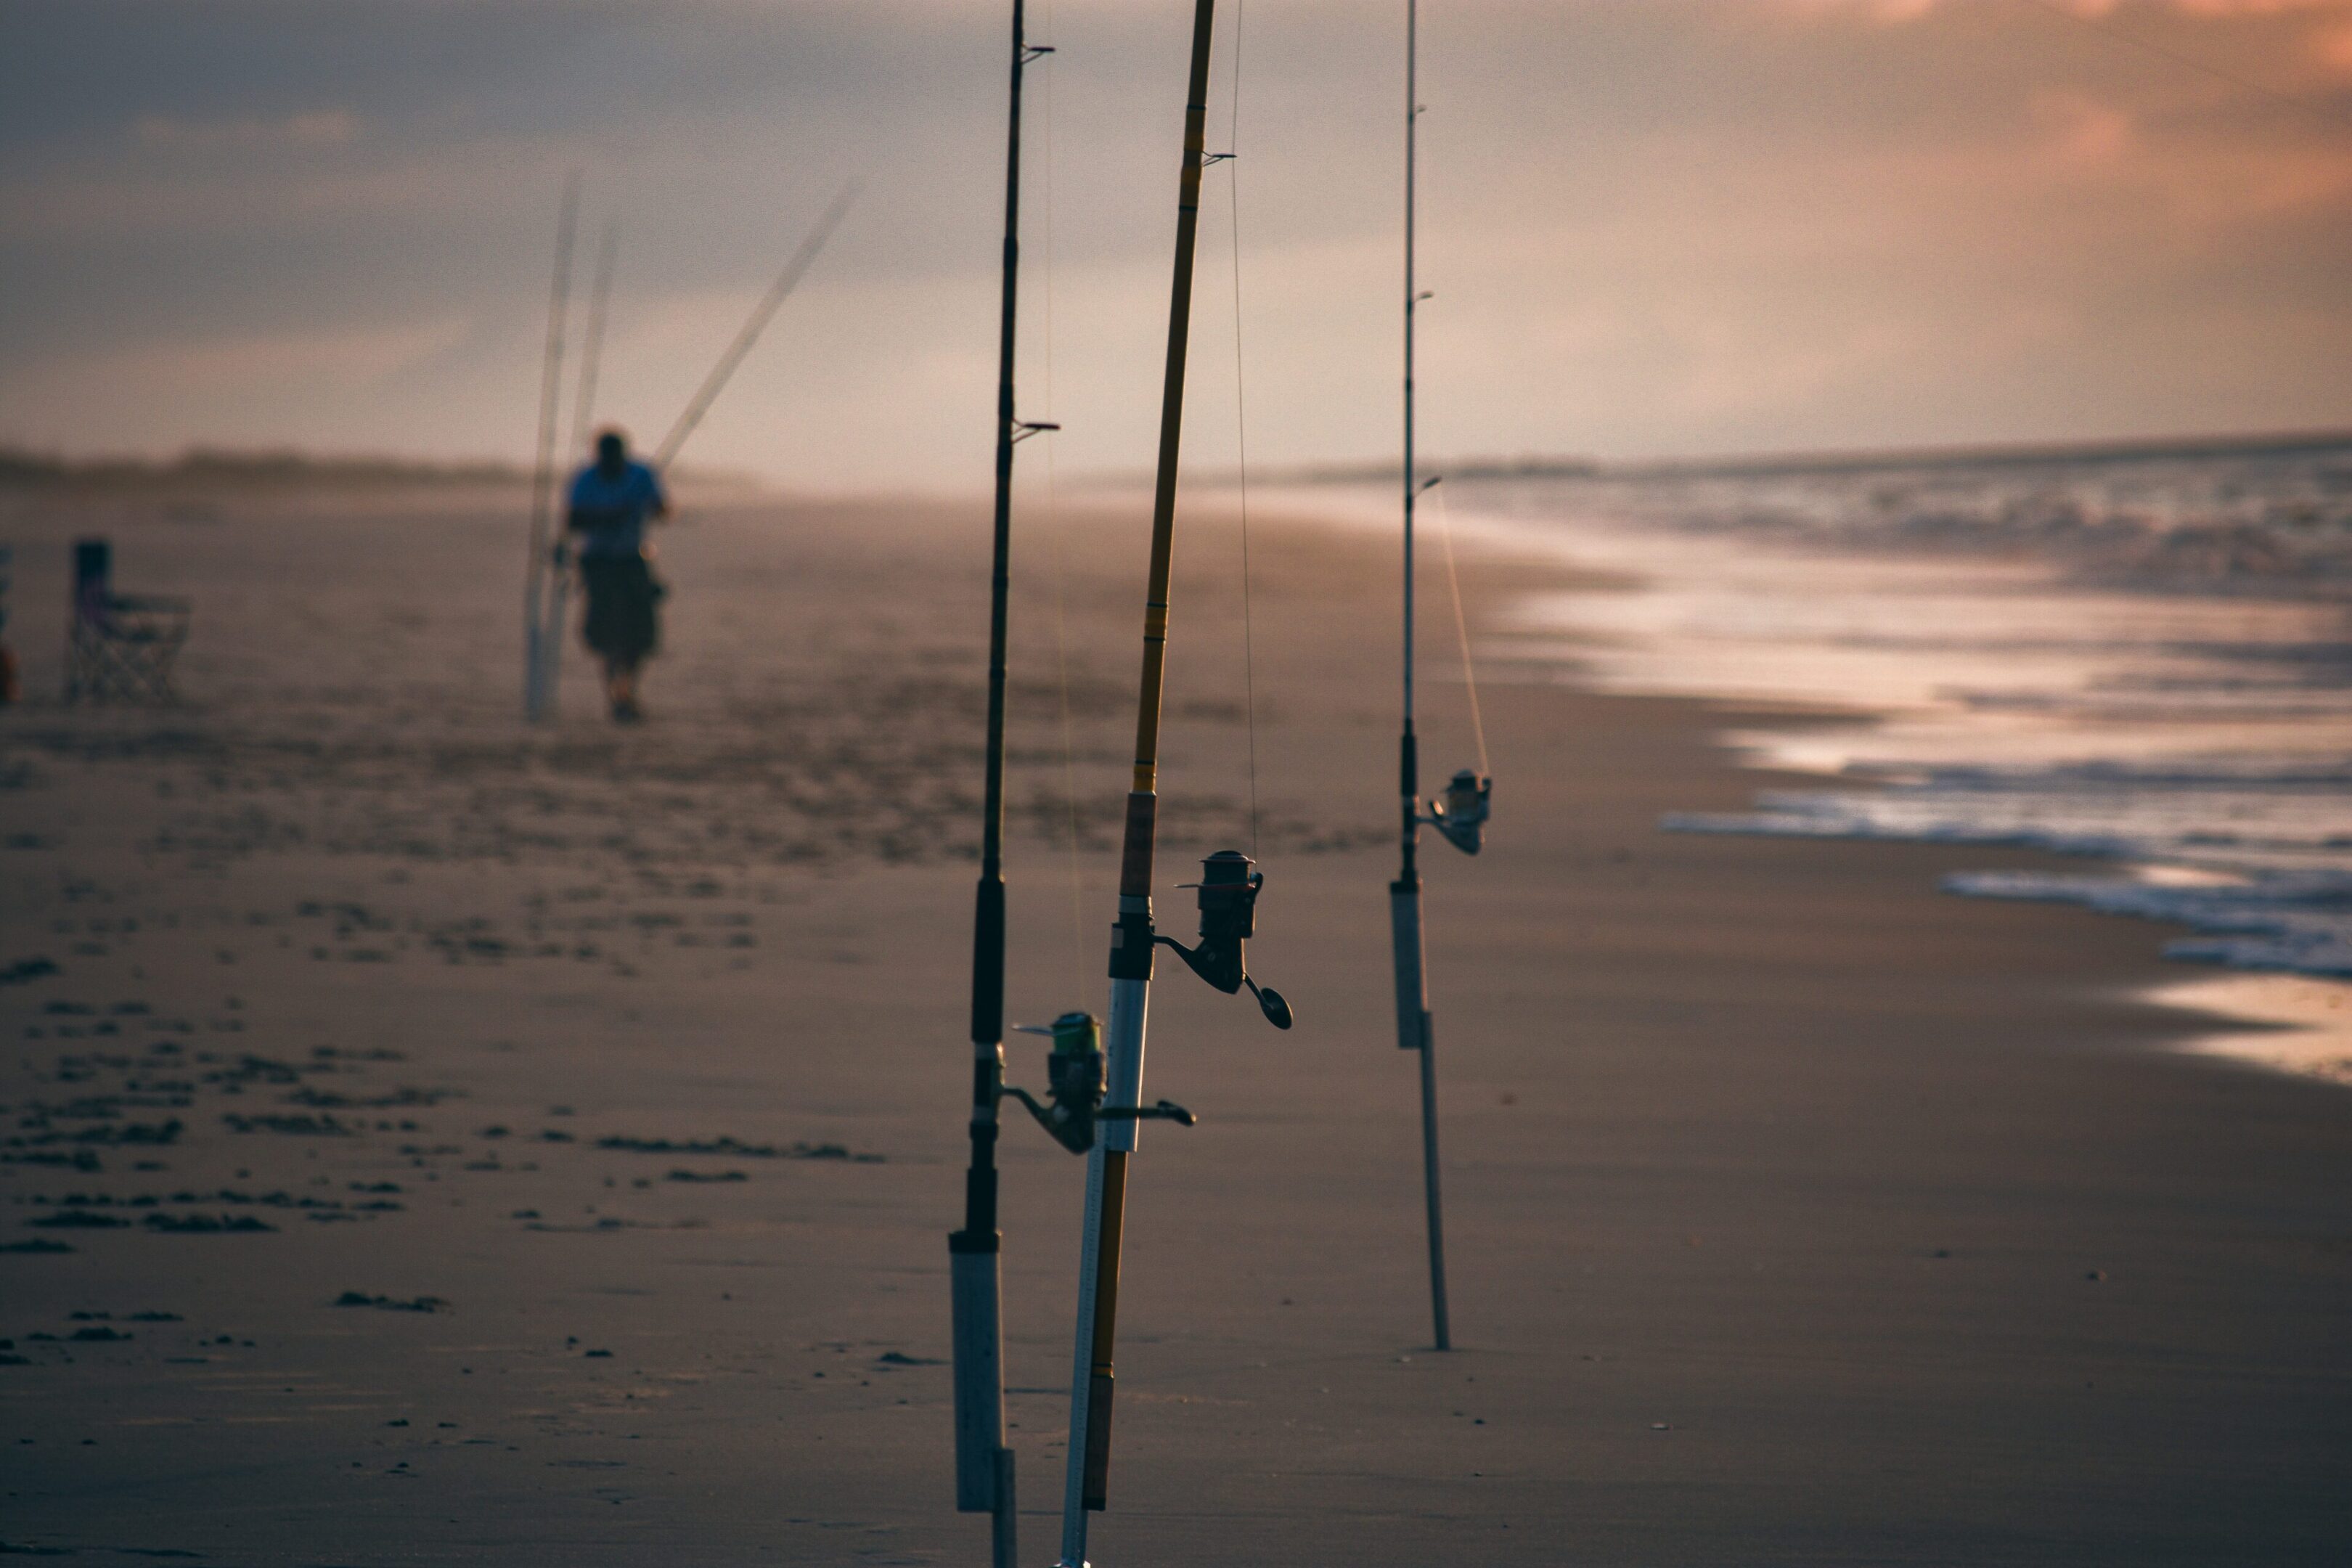 A person walking on the beach with fishing rods.